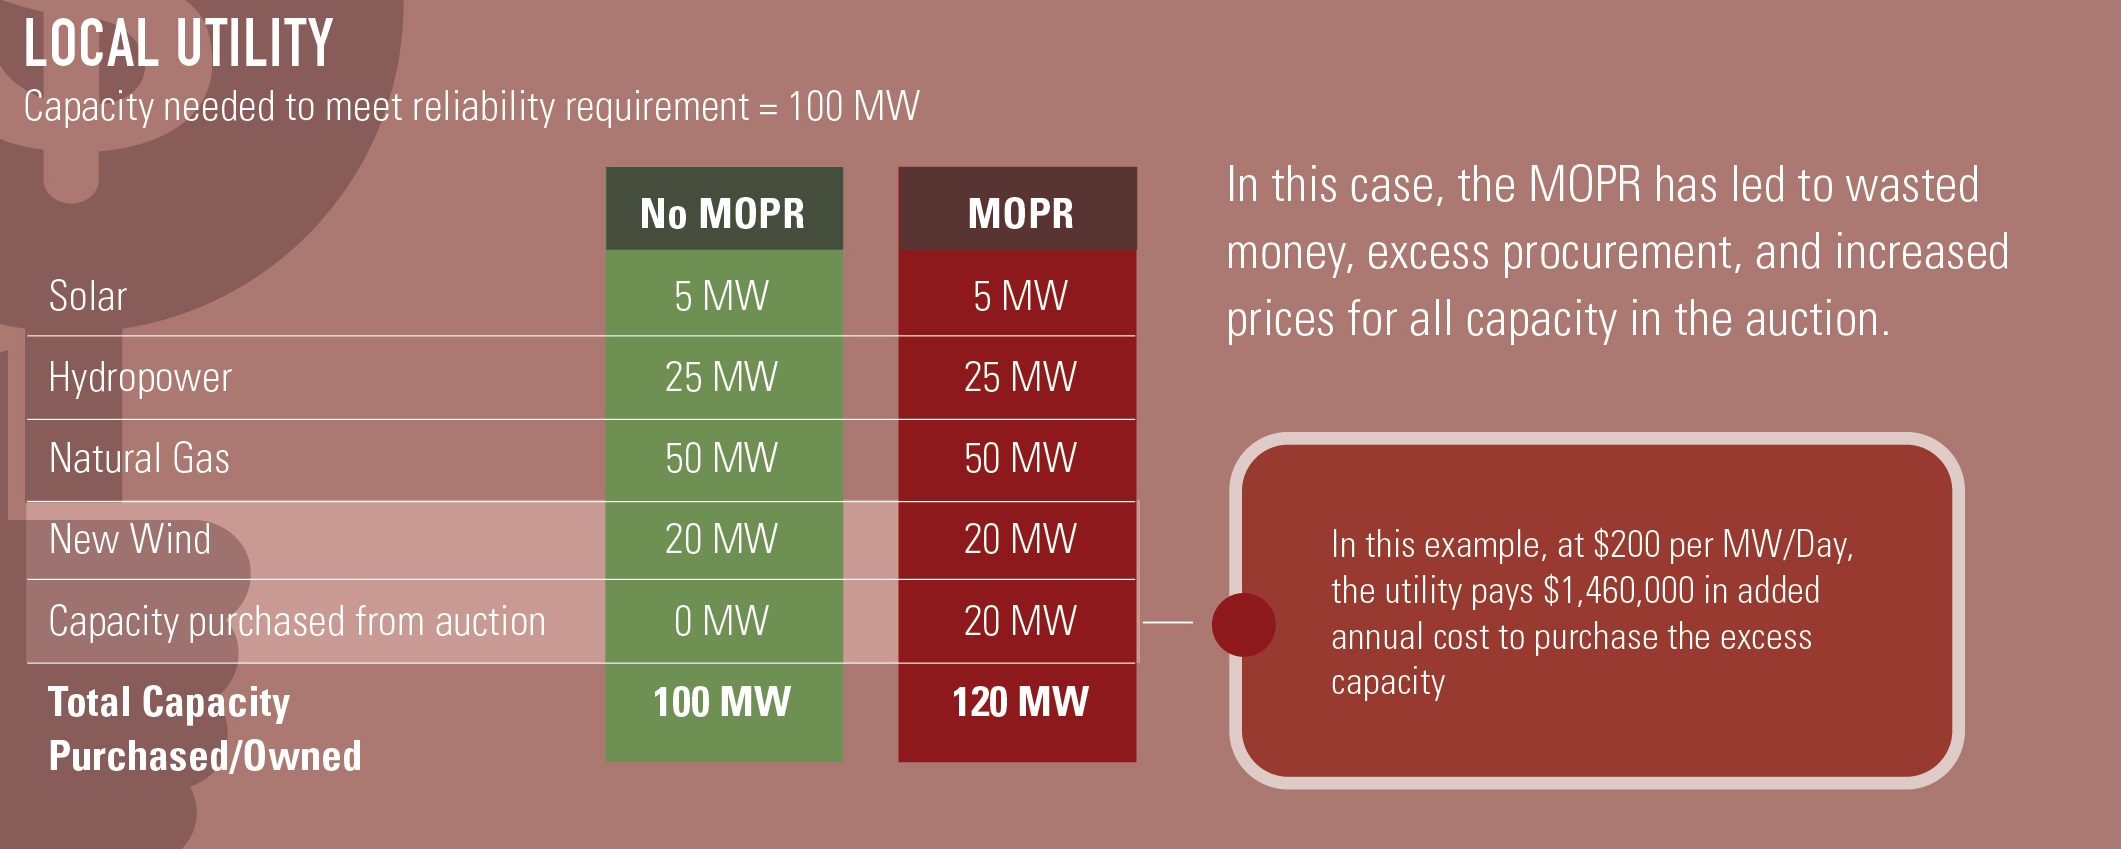 Capacity purchases in example utility, MOPR vs no MOPR